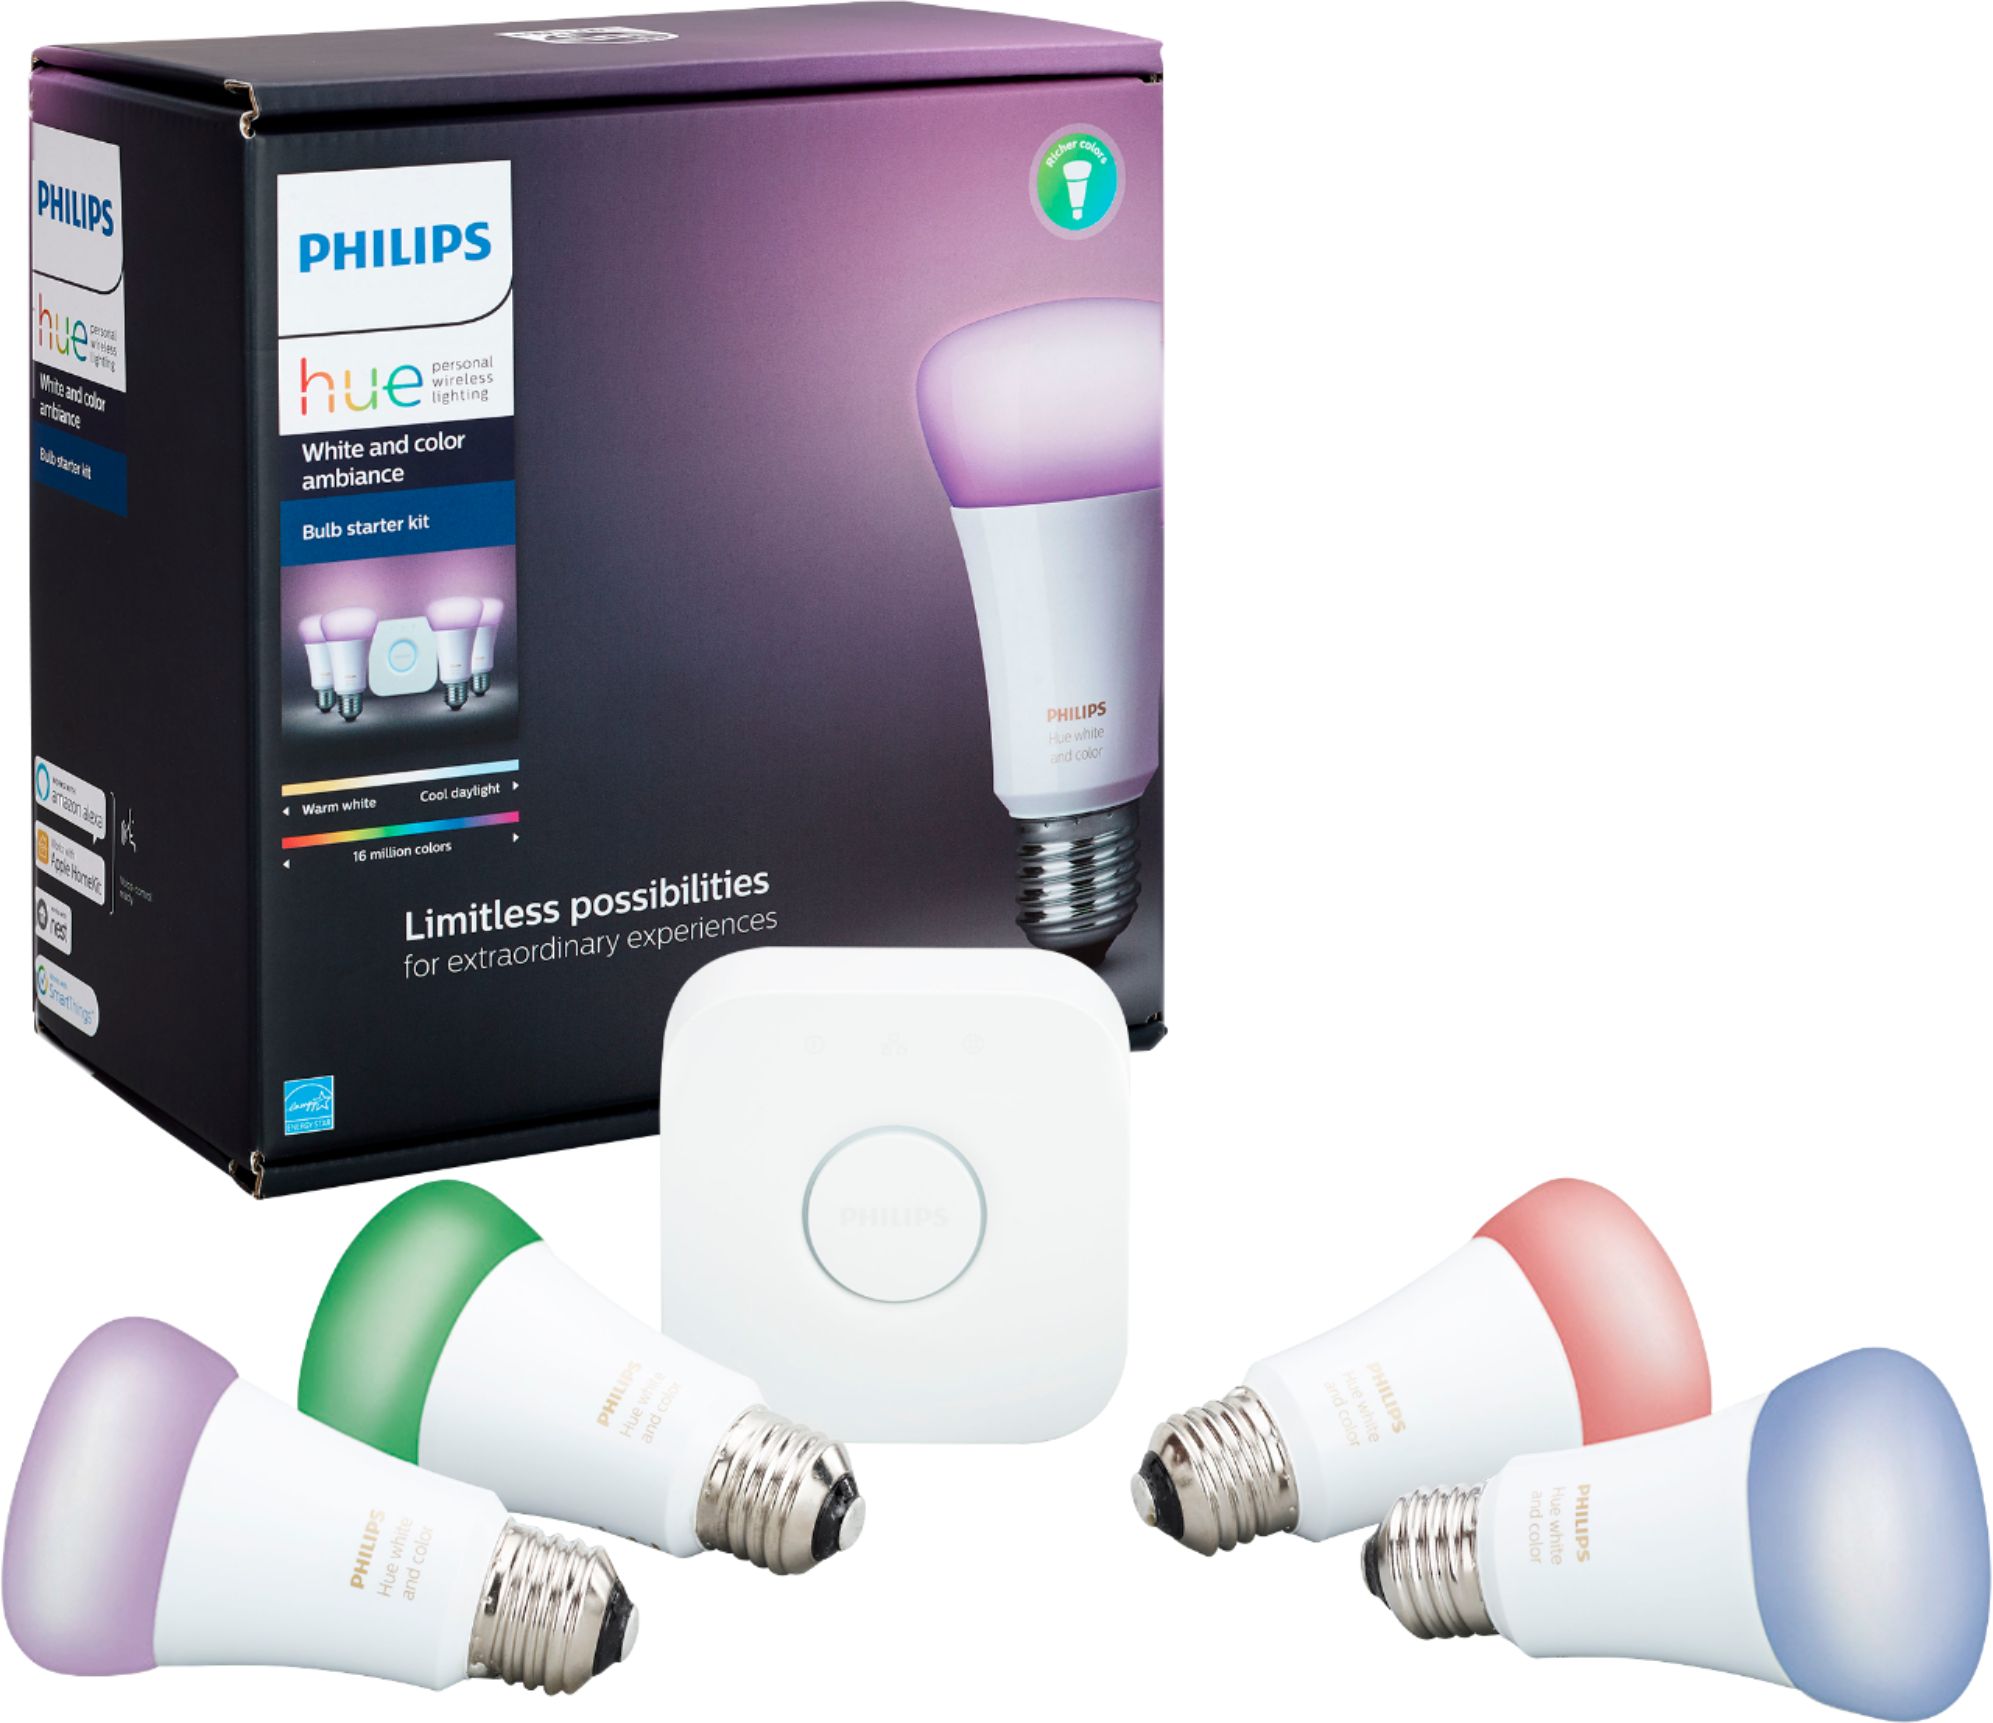 educate Messenger Thoughtful Best Buy: Philips Hue White and Color Ambiance A19 LED Starter Kit  Multicolor 471960